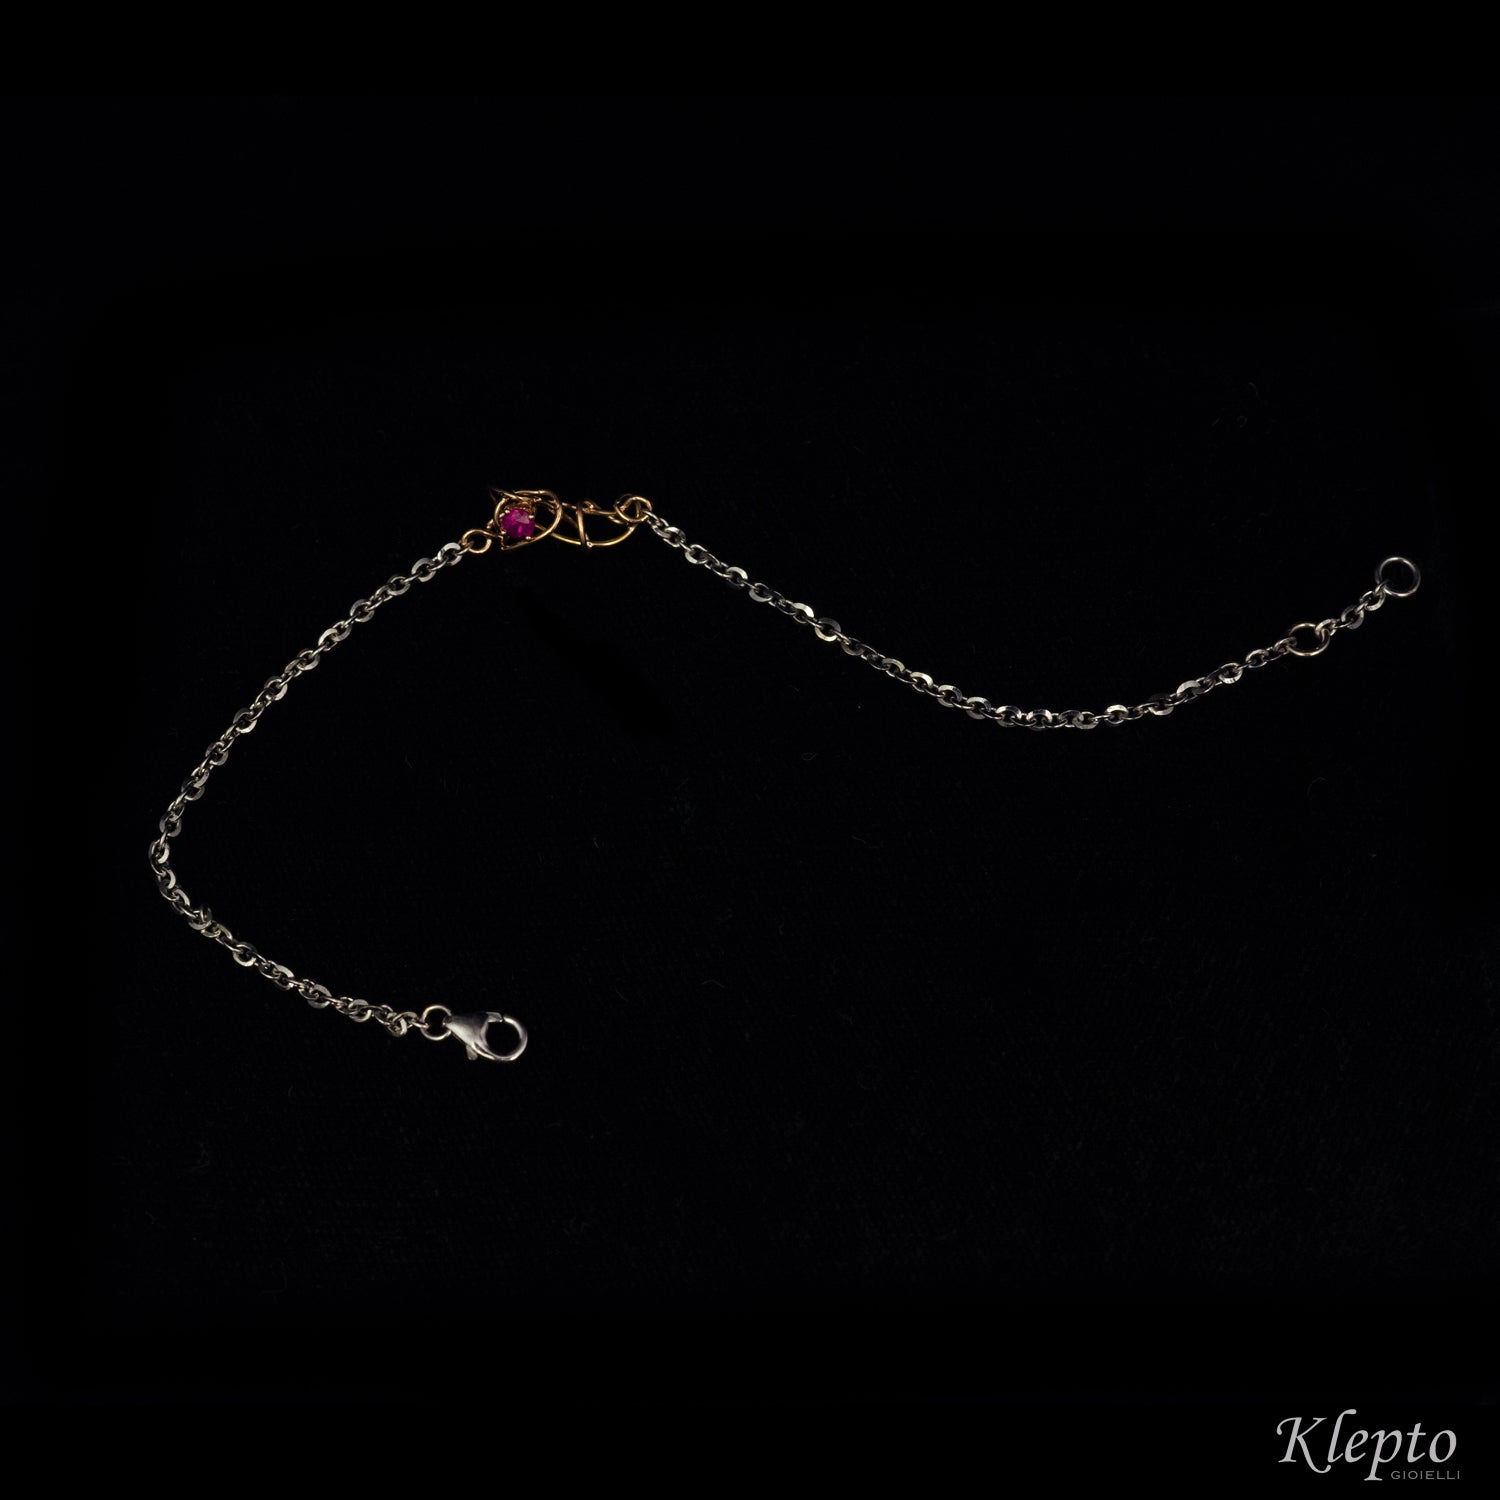 White gold bracelet with Ruby and rose gold knot